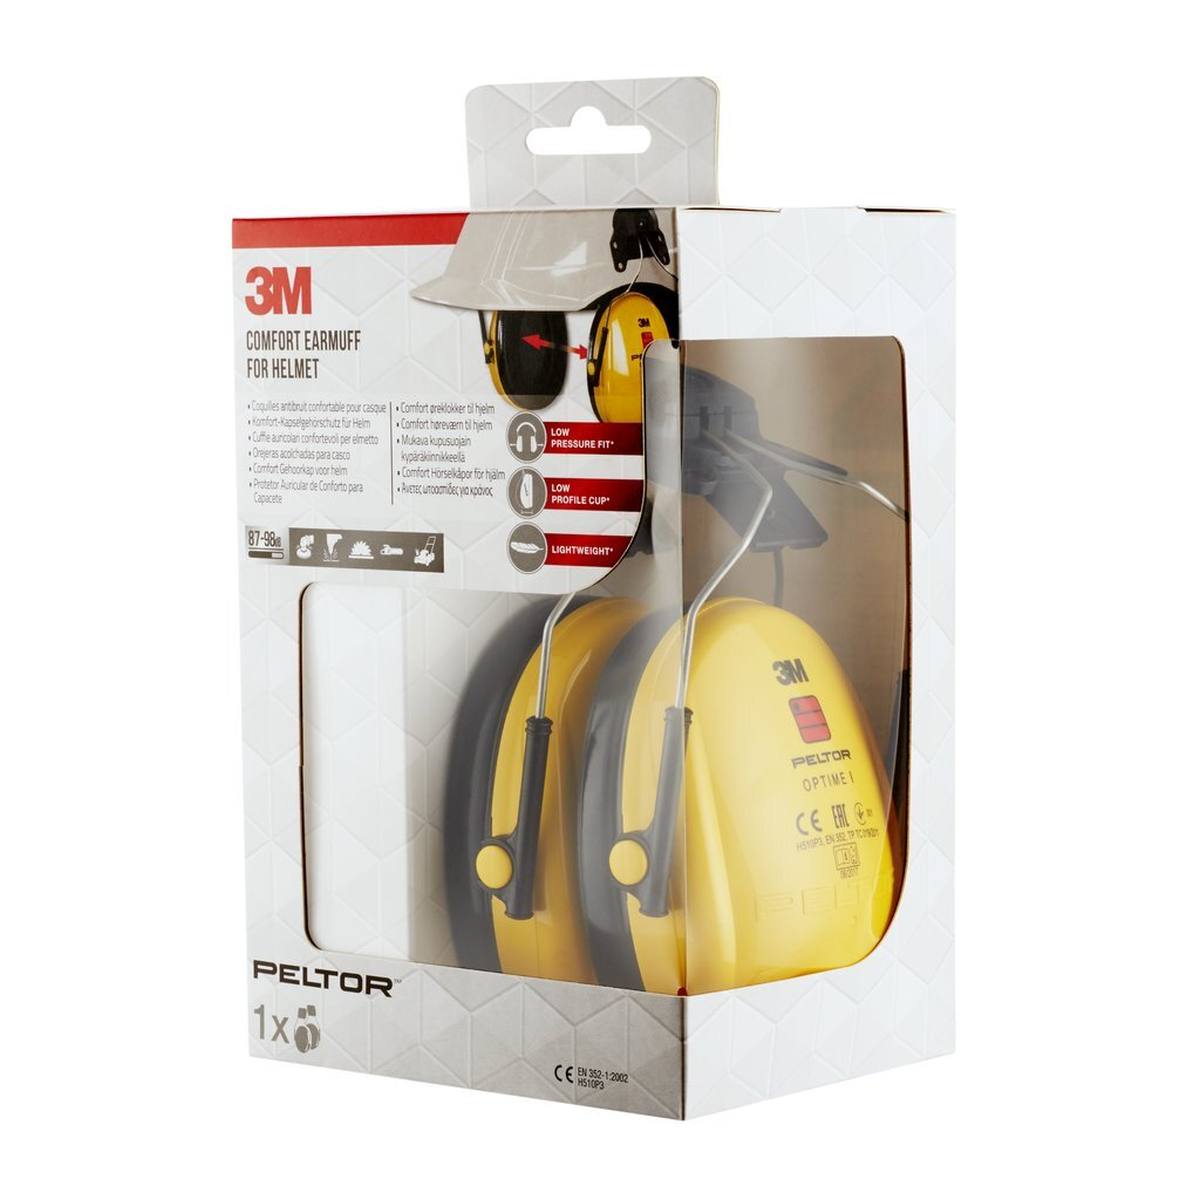 3M PELTOR Optime I earmuffs, helmet attachment, with helmet adapter, H510P3 (87 to 98 dB)